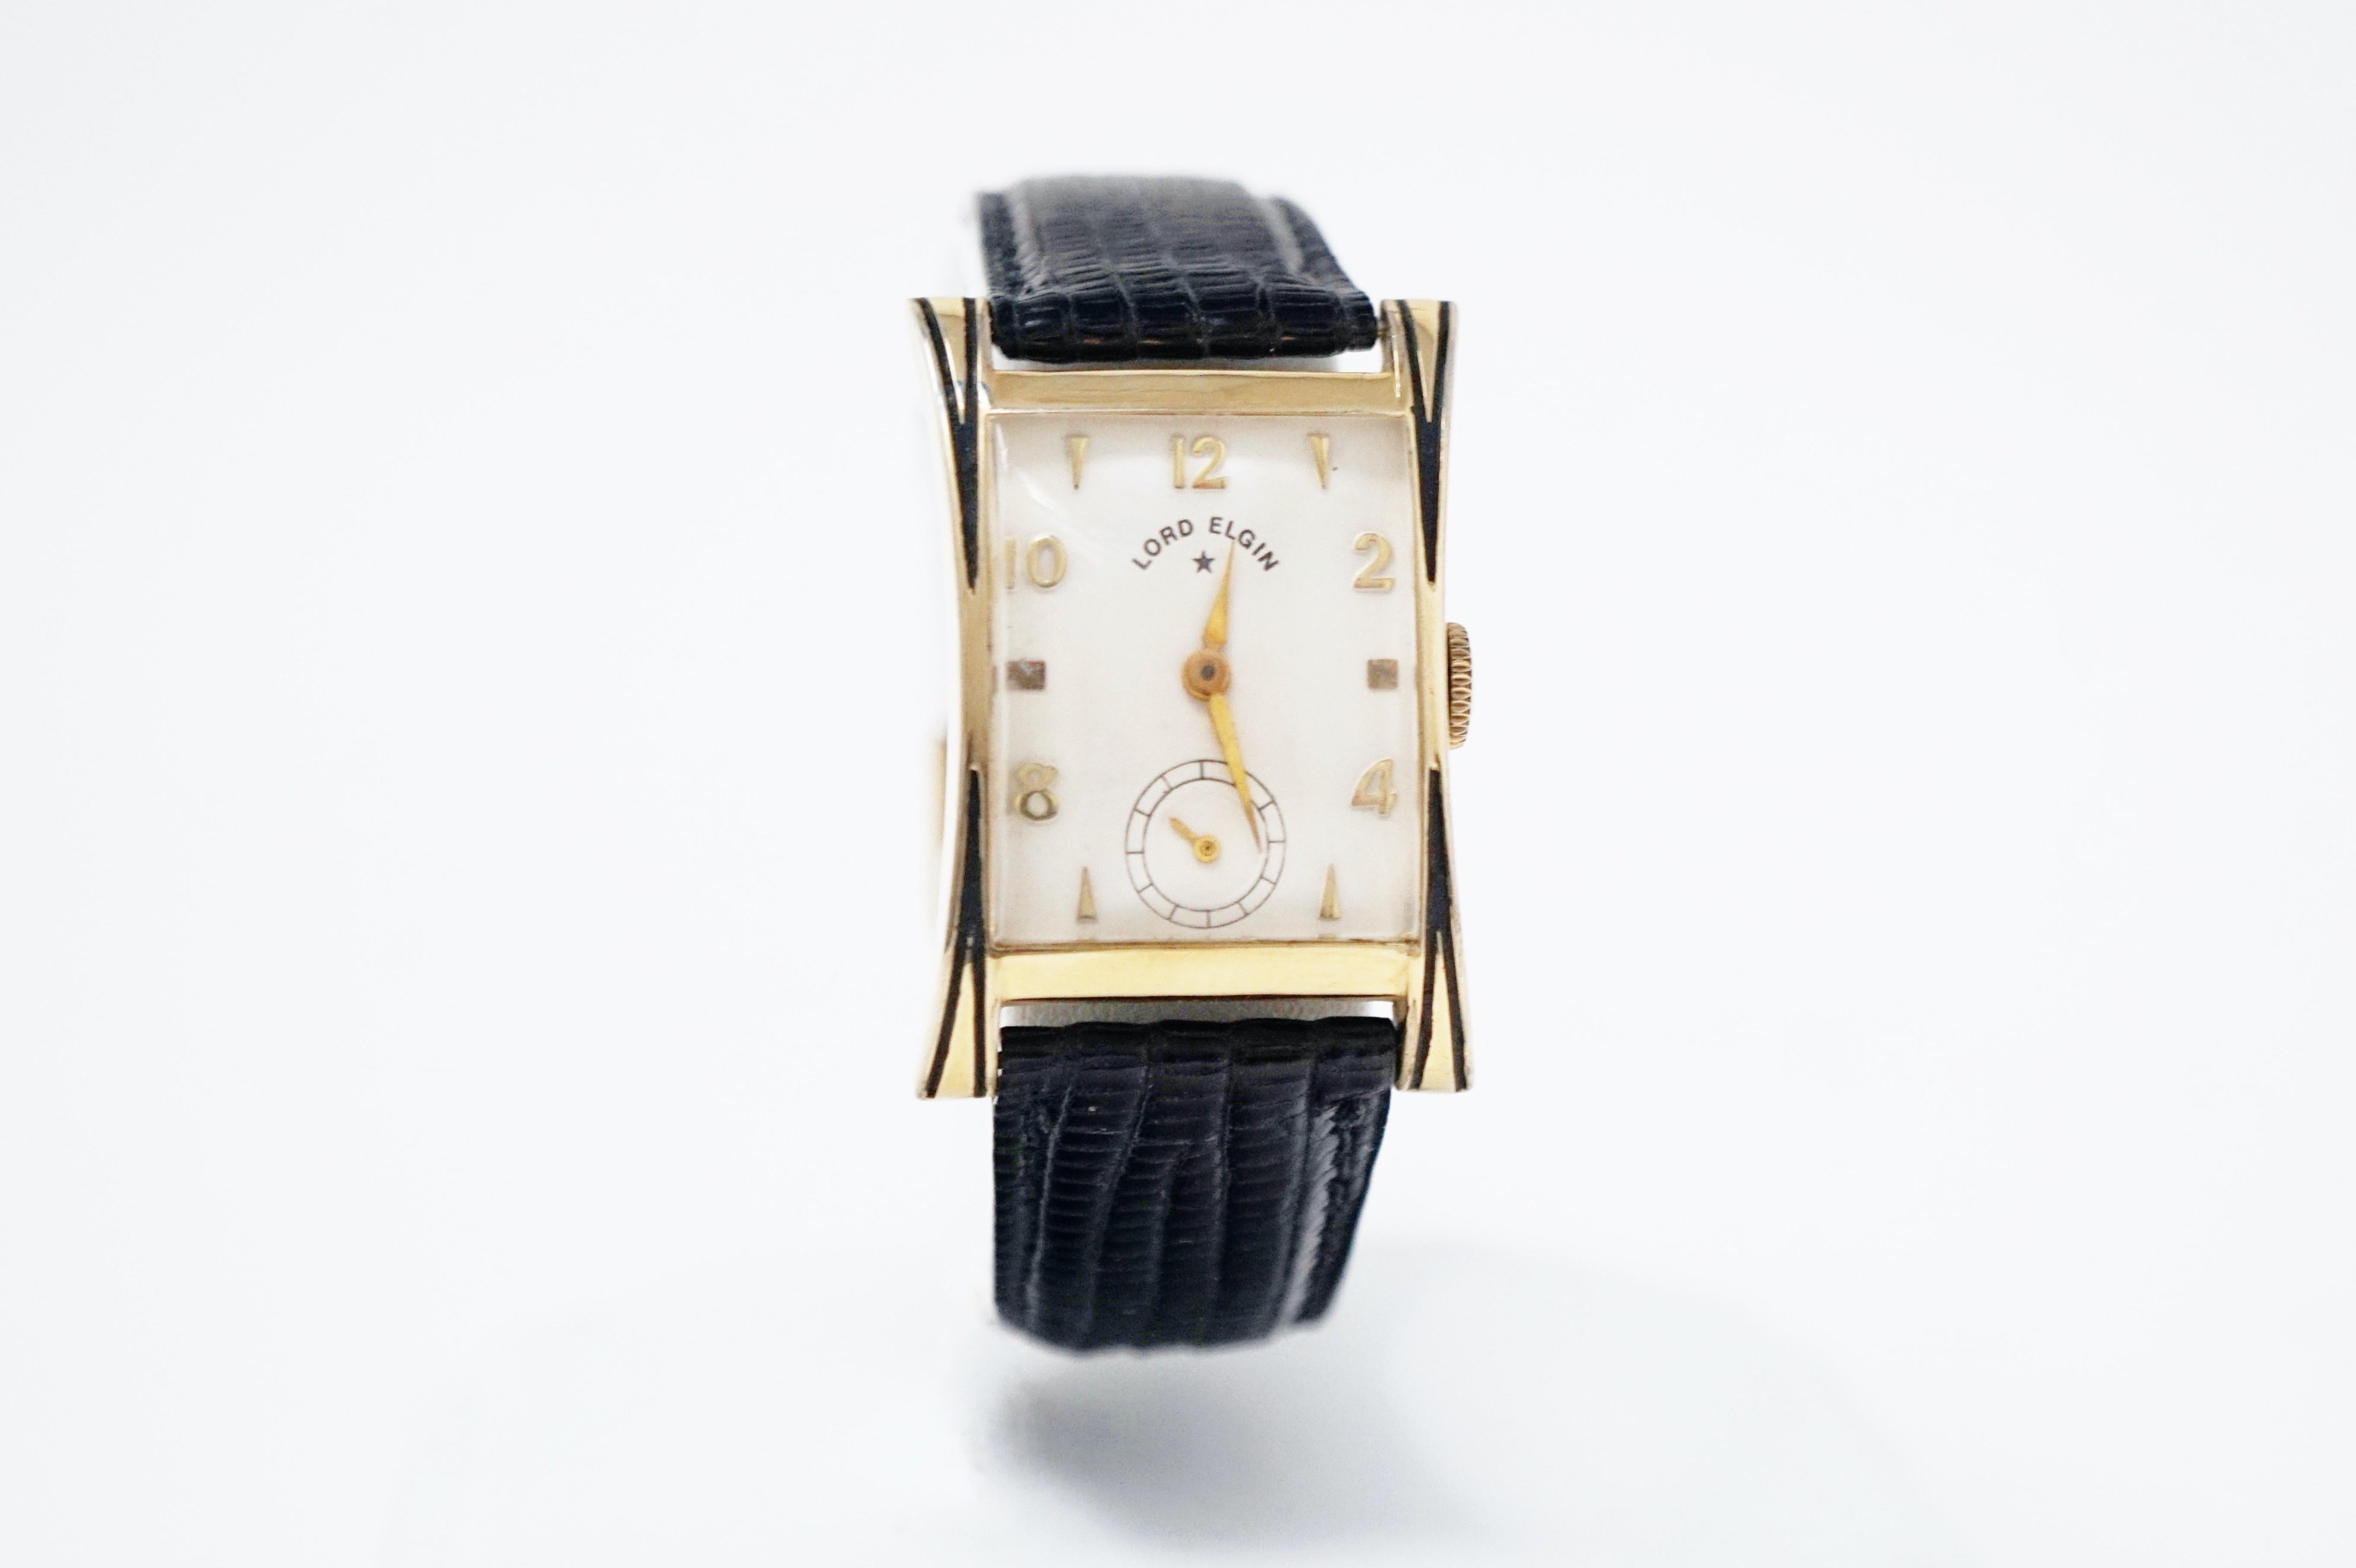 The Thornton is one of Elgin’s signature watch designs in the mid 1950s. In typical Lord Elgin style, the case is 14K gold filled with a top of the line 21 jewel movement.

The size of this watch makes it ideal for either a man or woman.

DETAILS:
-